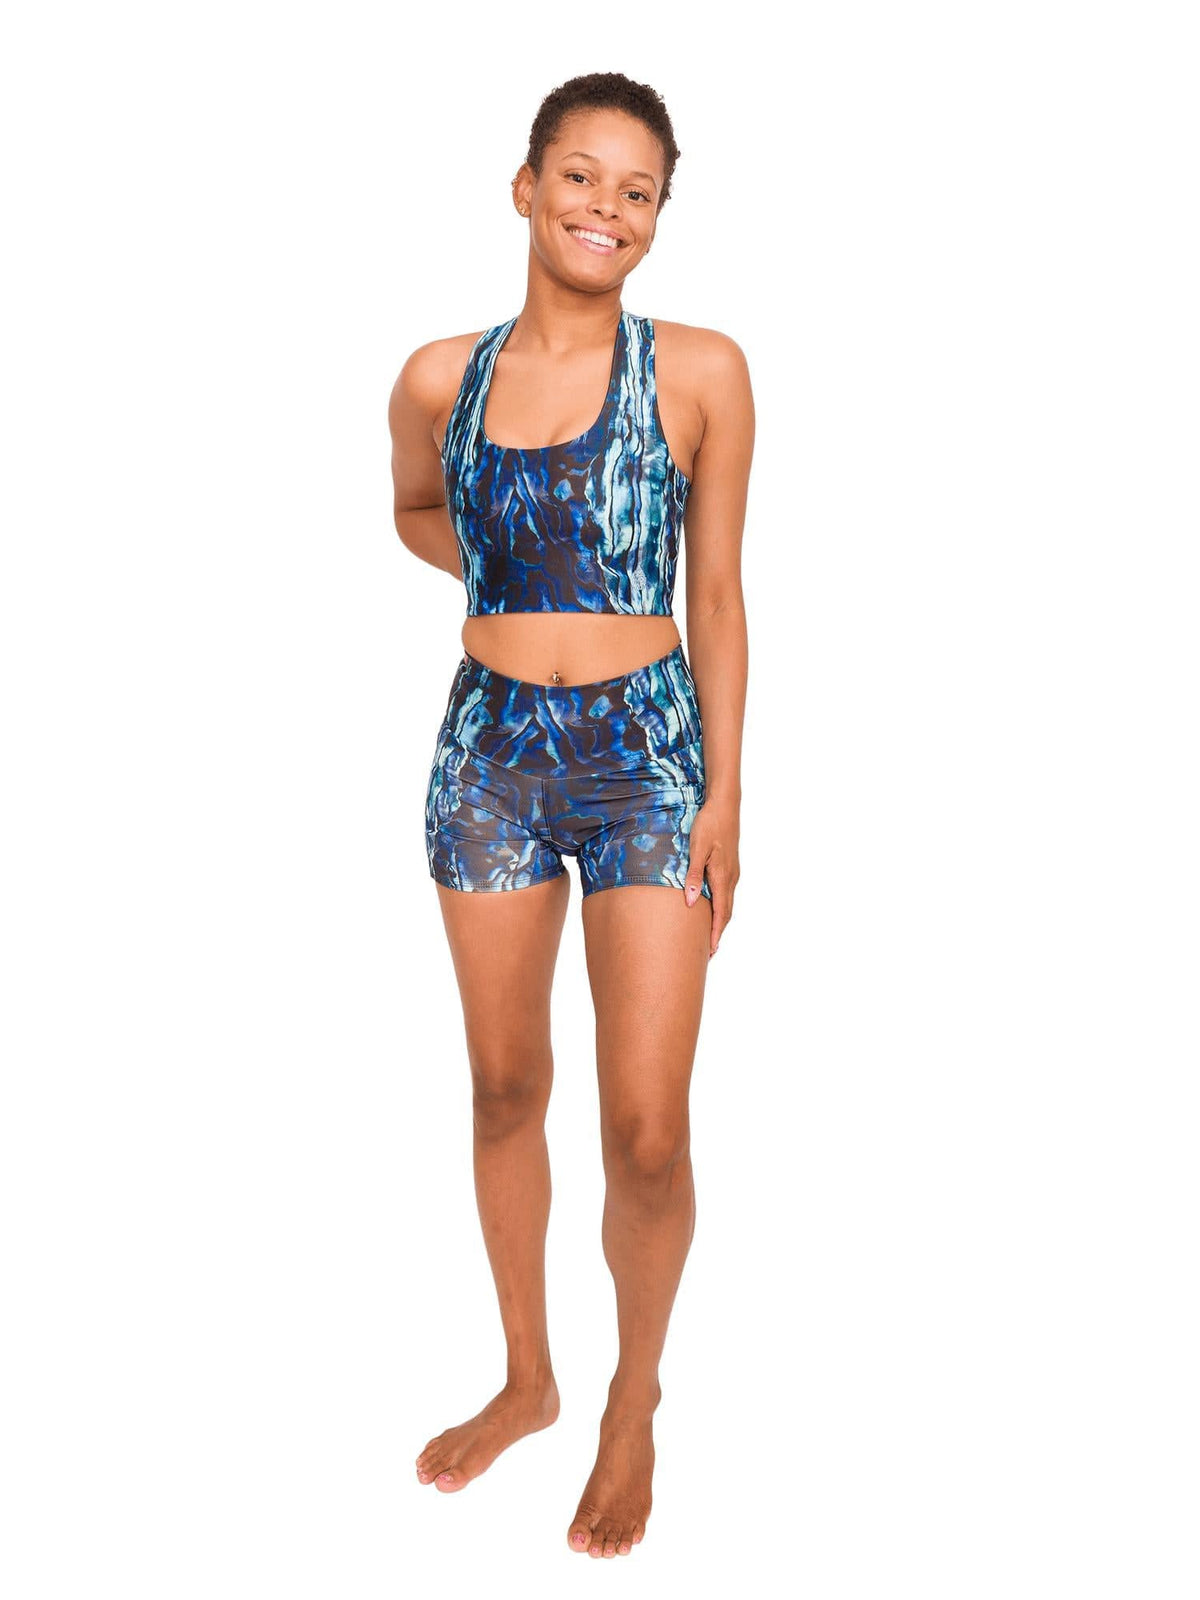 Model: Syriah is a sea turtle conservation biologist. She is 5&#39;7&quot;, 130lbs and is wearing a size S shorts and S top. 